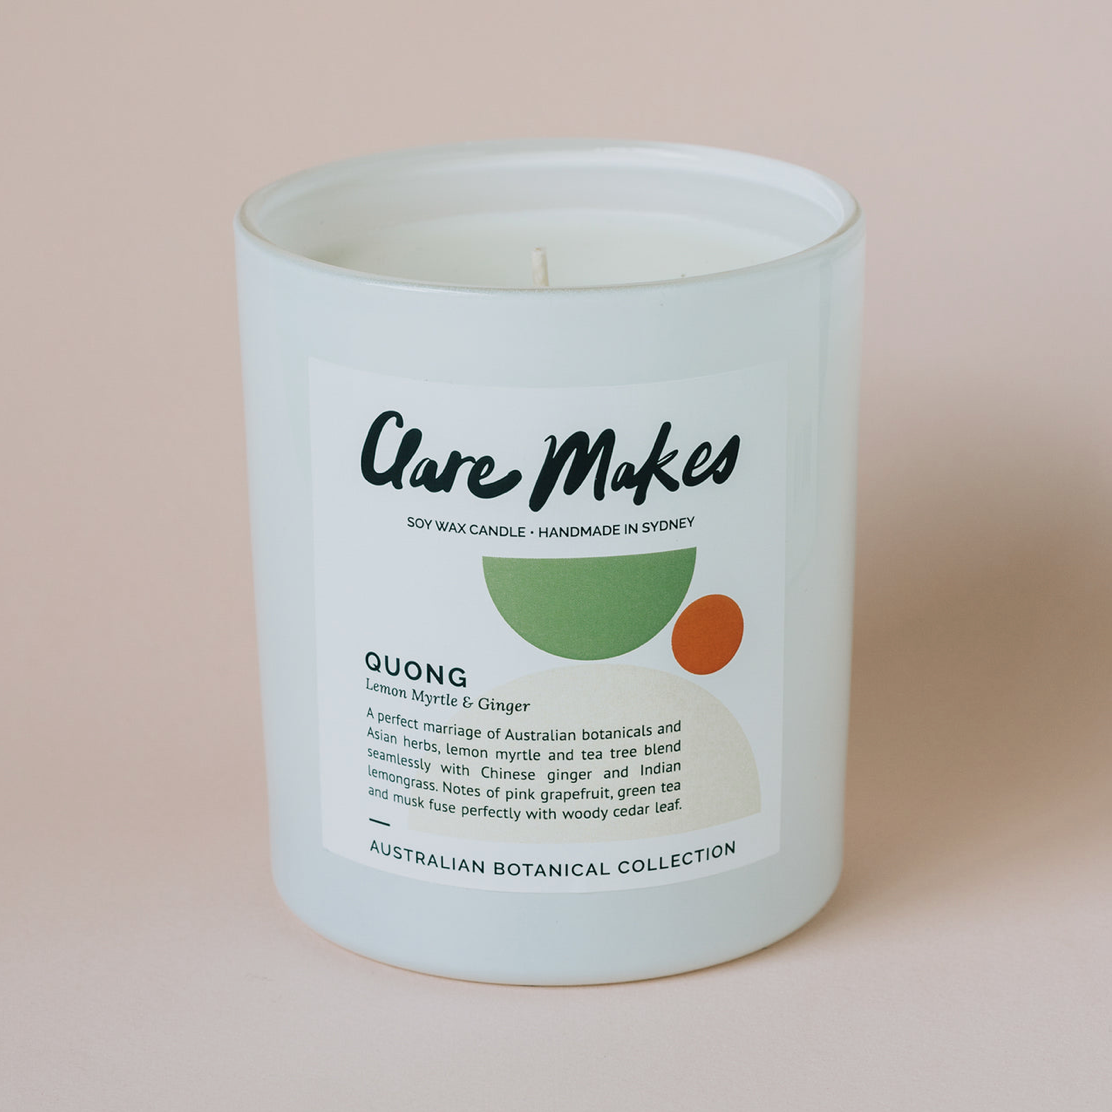 Quong Lemon Myrtle and Ginger Candle